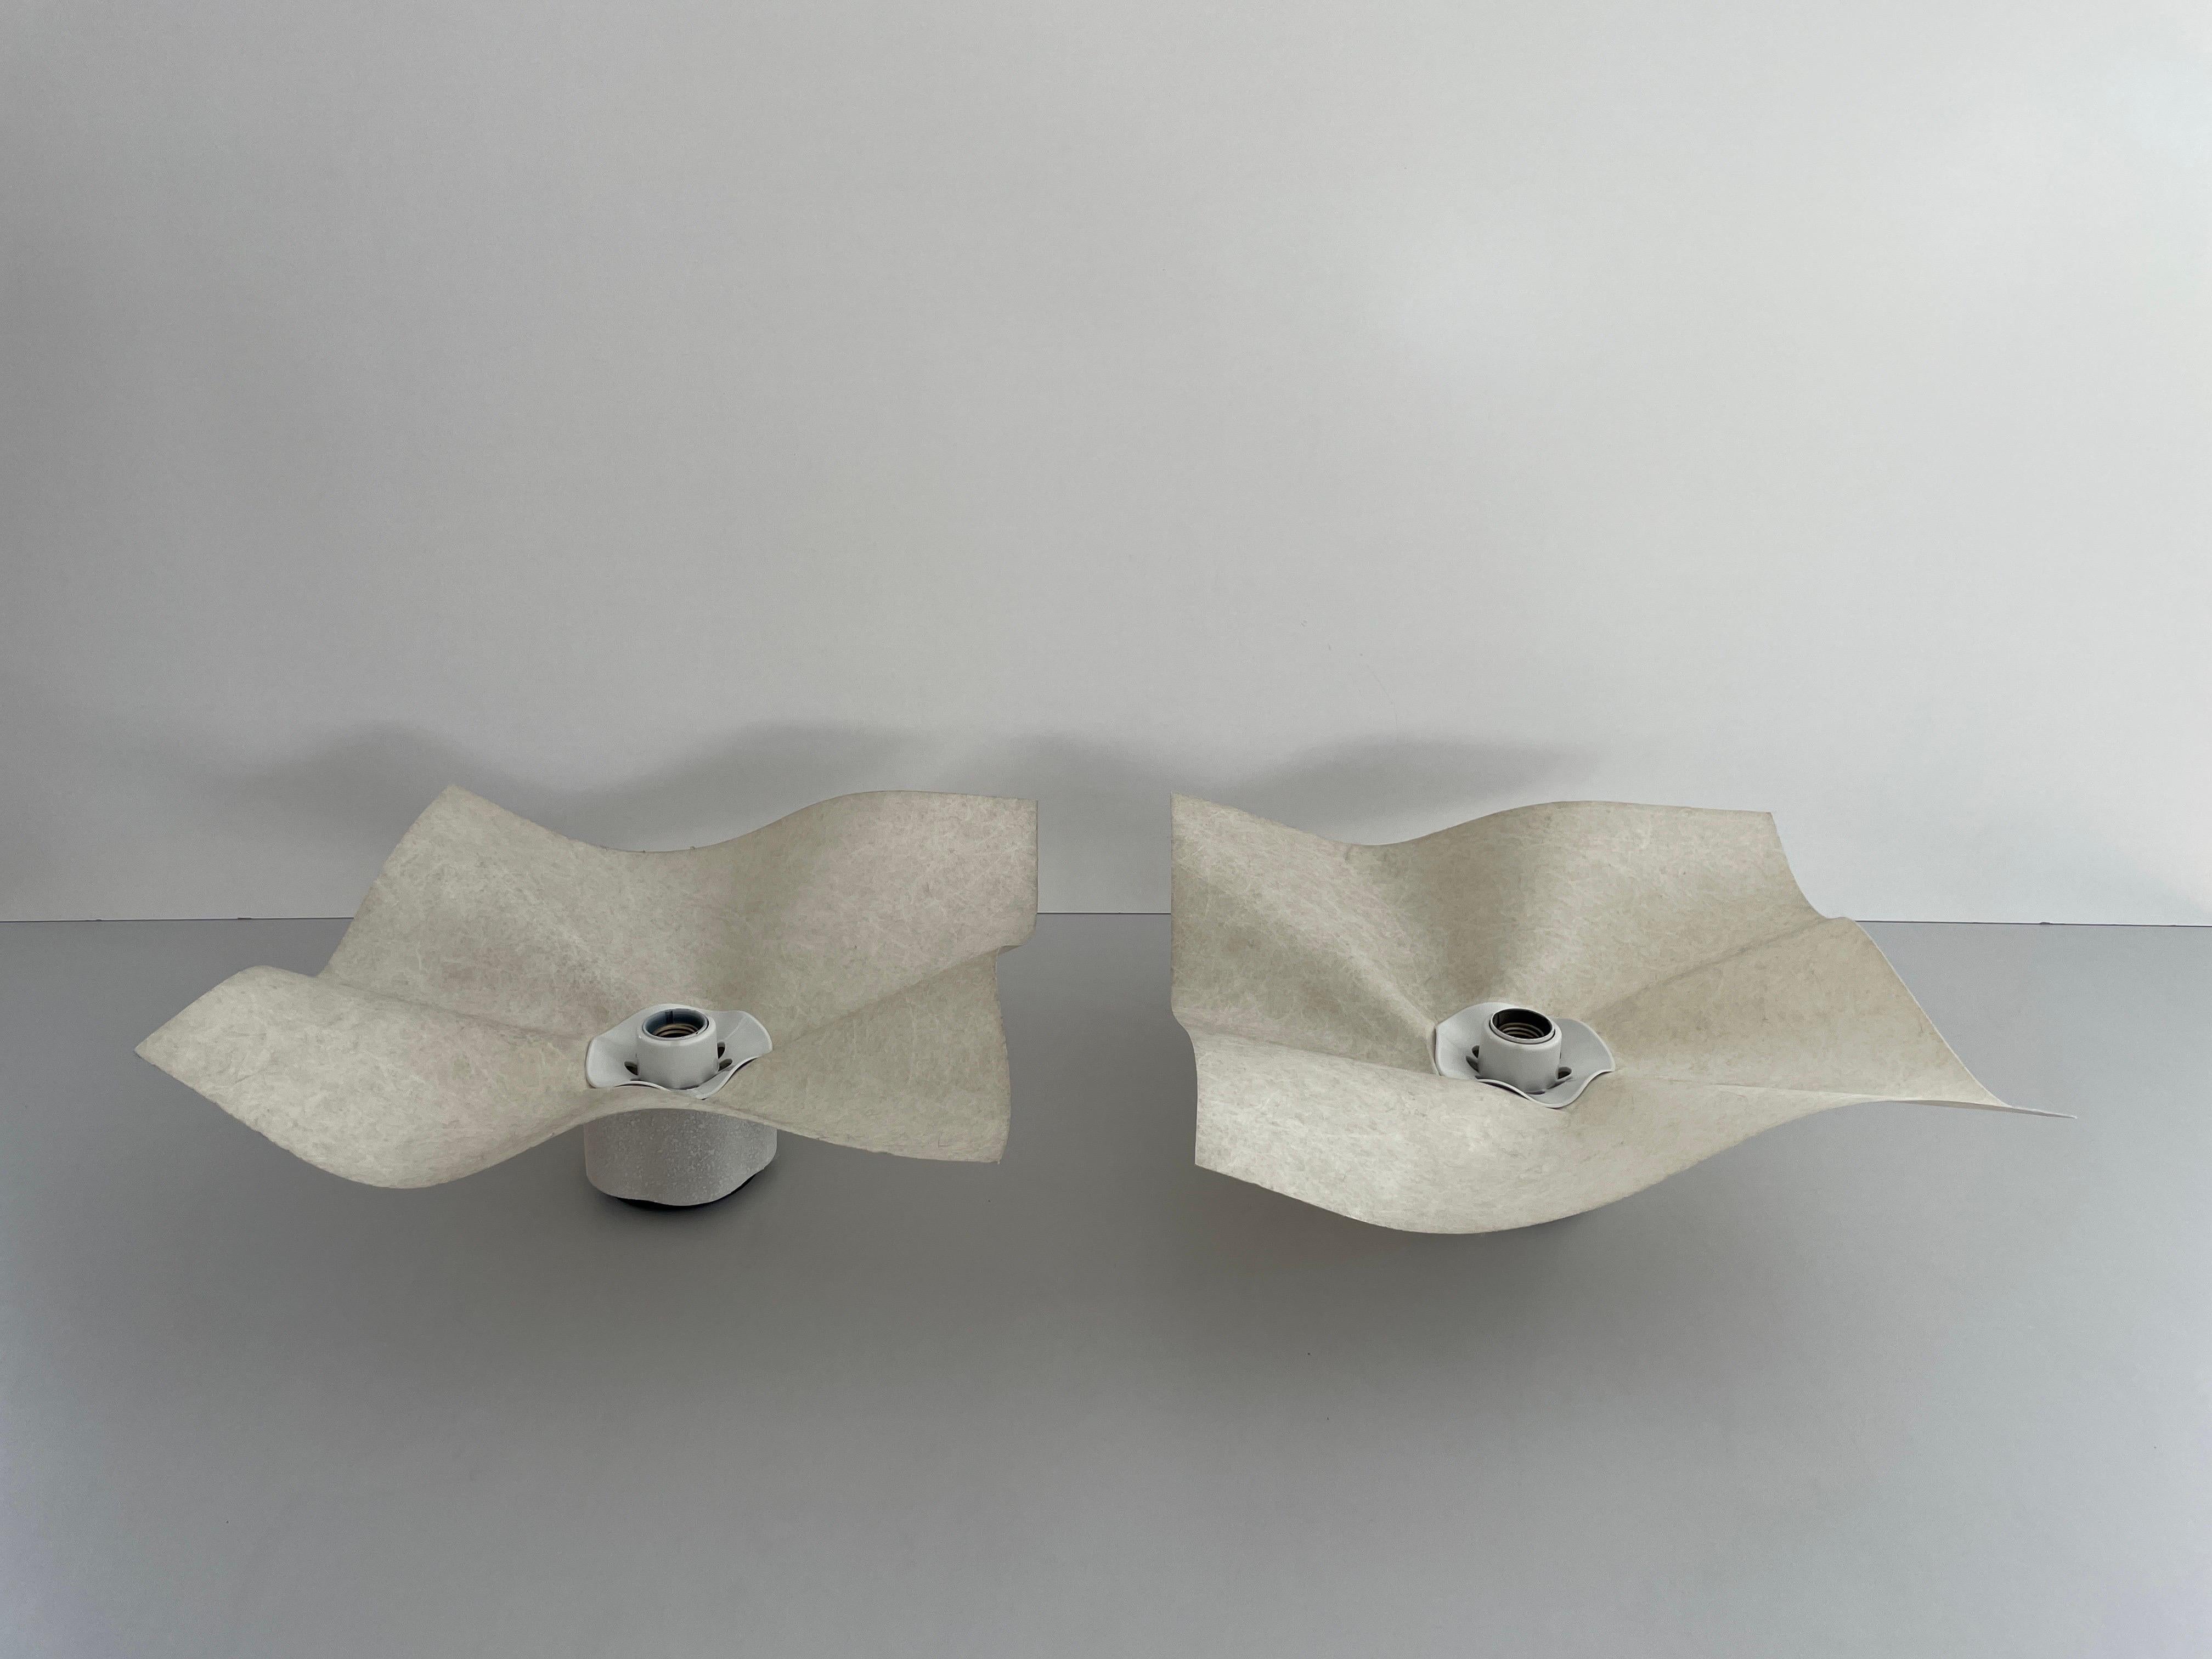 Pair of Sconces or Ceiling Lamps by Mario Bellini for Artemide, 1970s, Italy

Lampshade is in good condition and very clean. 
This lamp works with E27 light bulb
Wired and suitable to use with 220V and 110V for all countries.

Measures: 
45 cm x 45